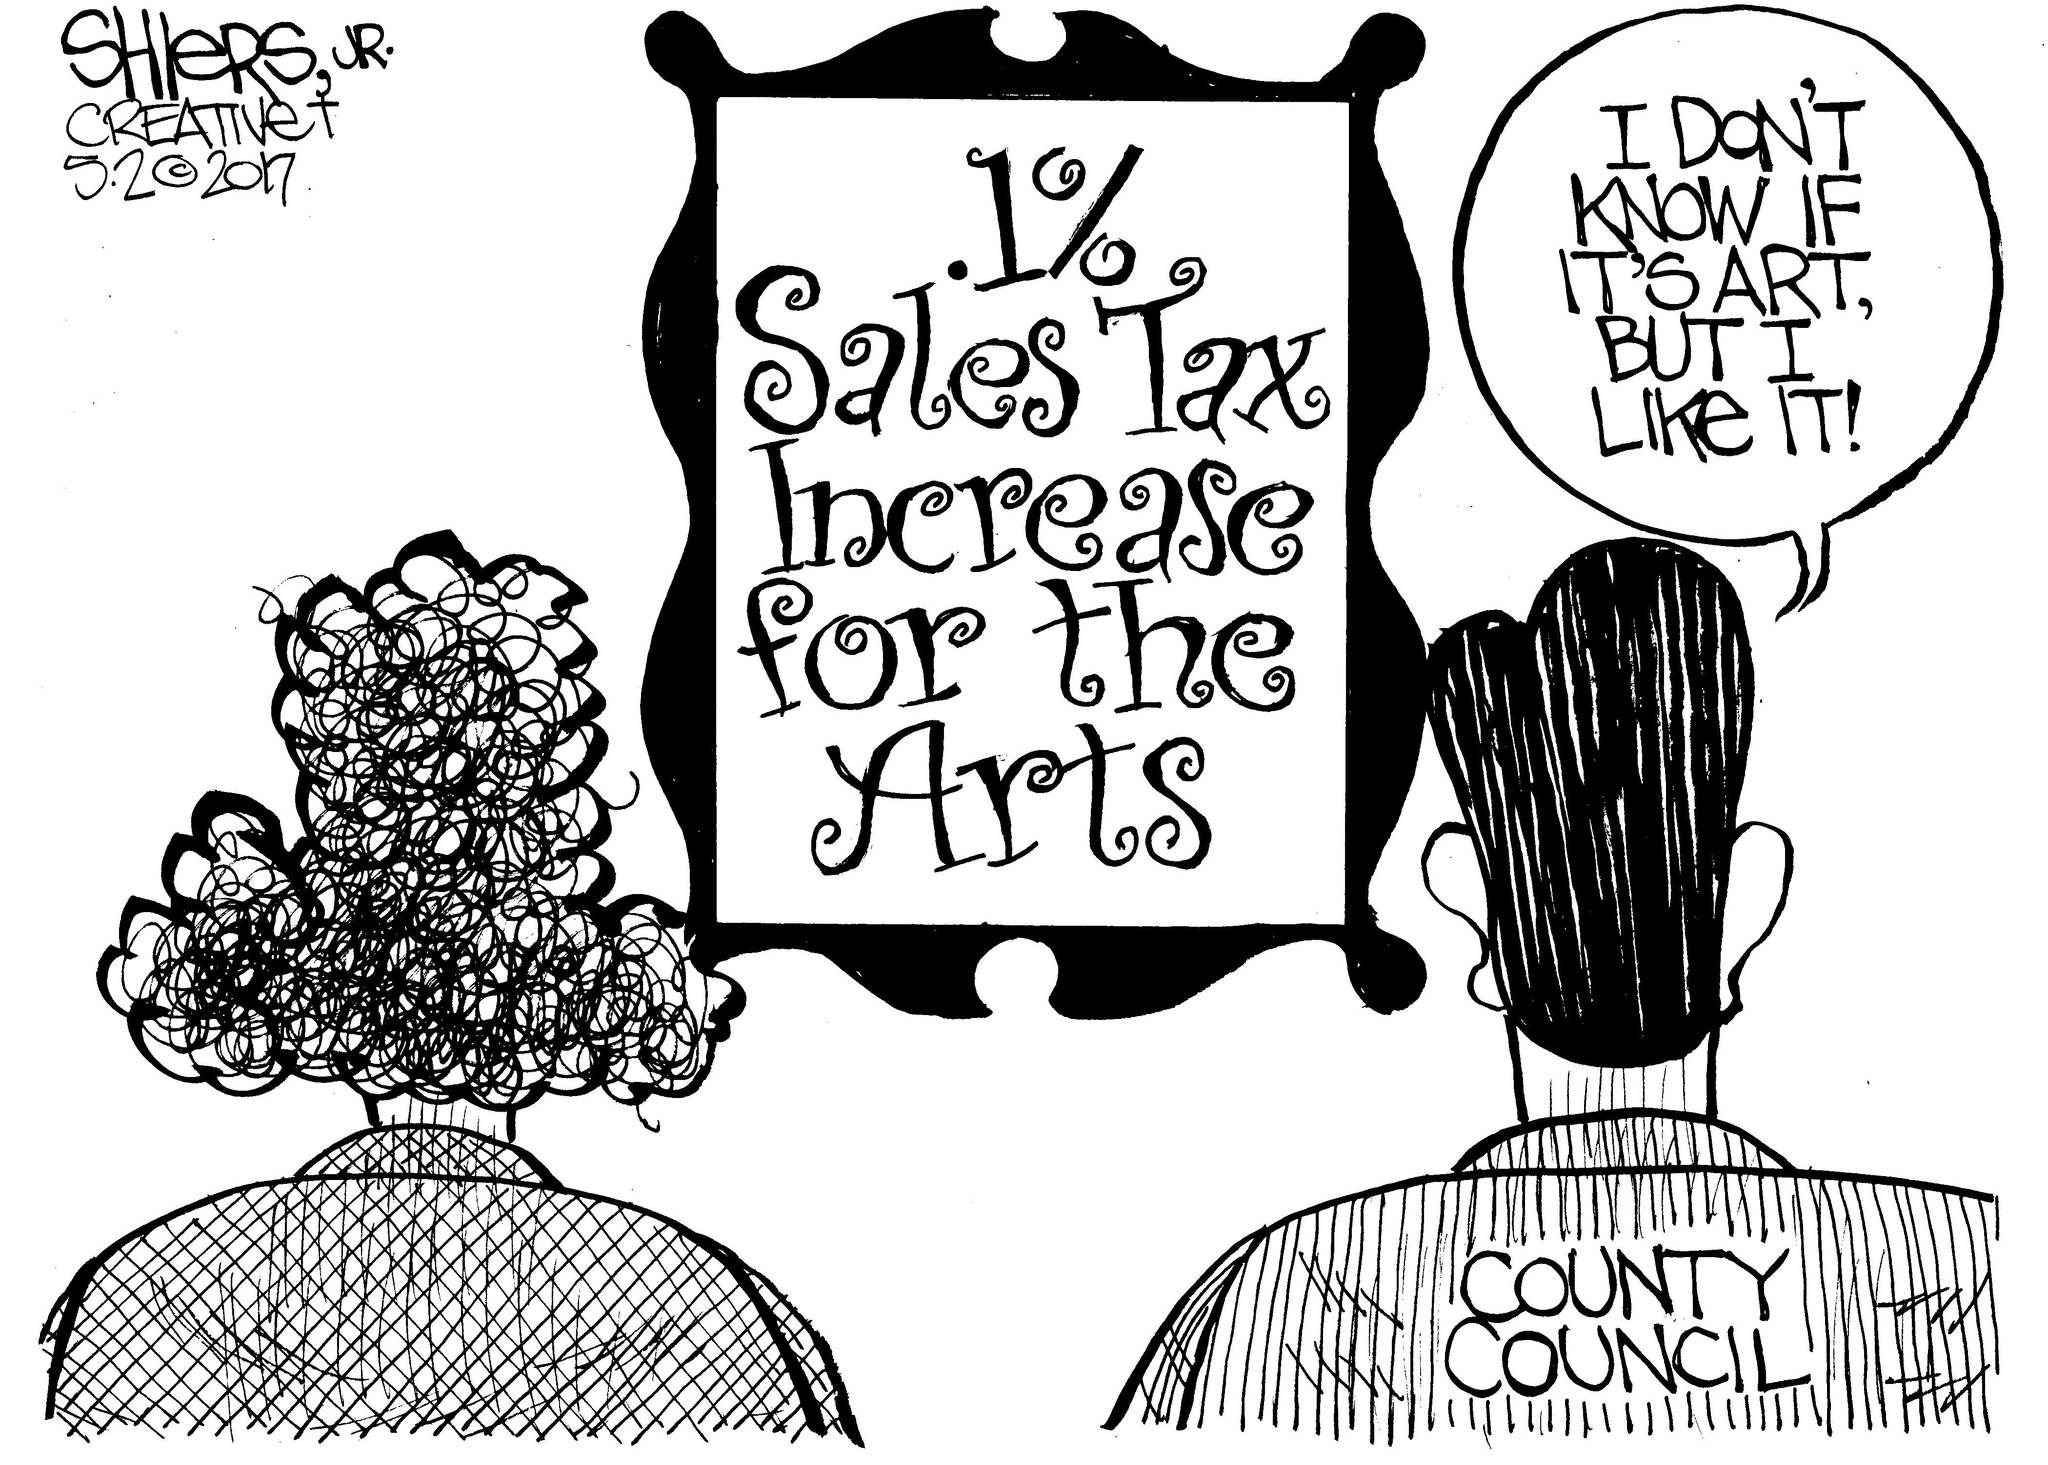 .1 % Sales Tax Increase For The Arts… (County Council) “I Don’t Know If It’s Art, But I Like It!”